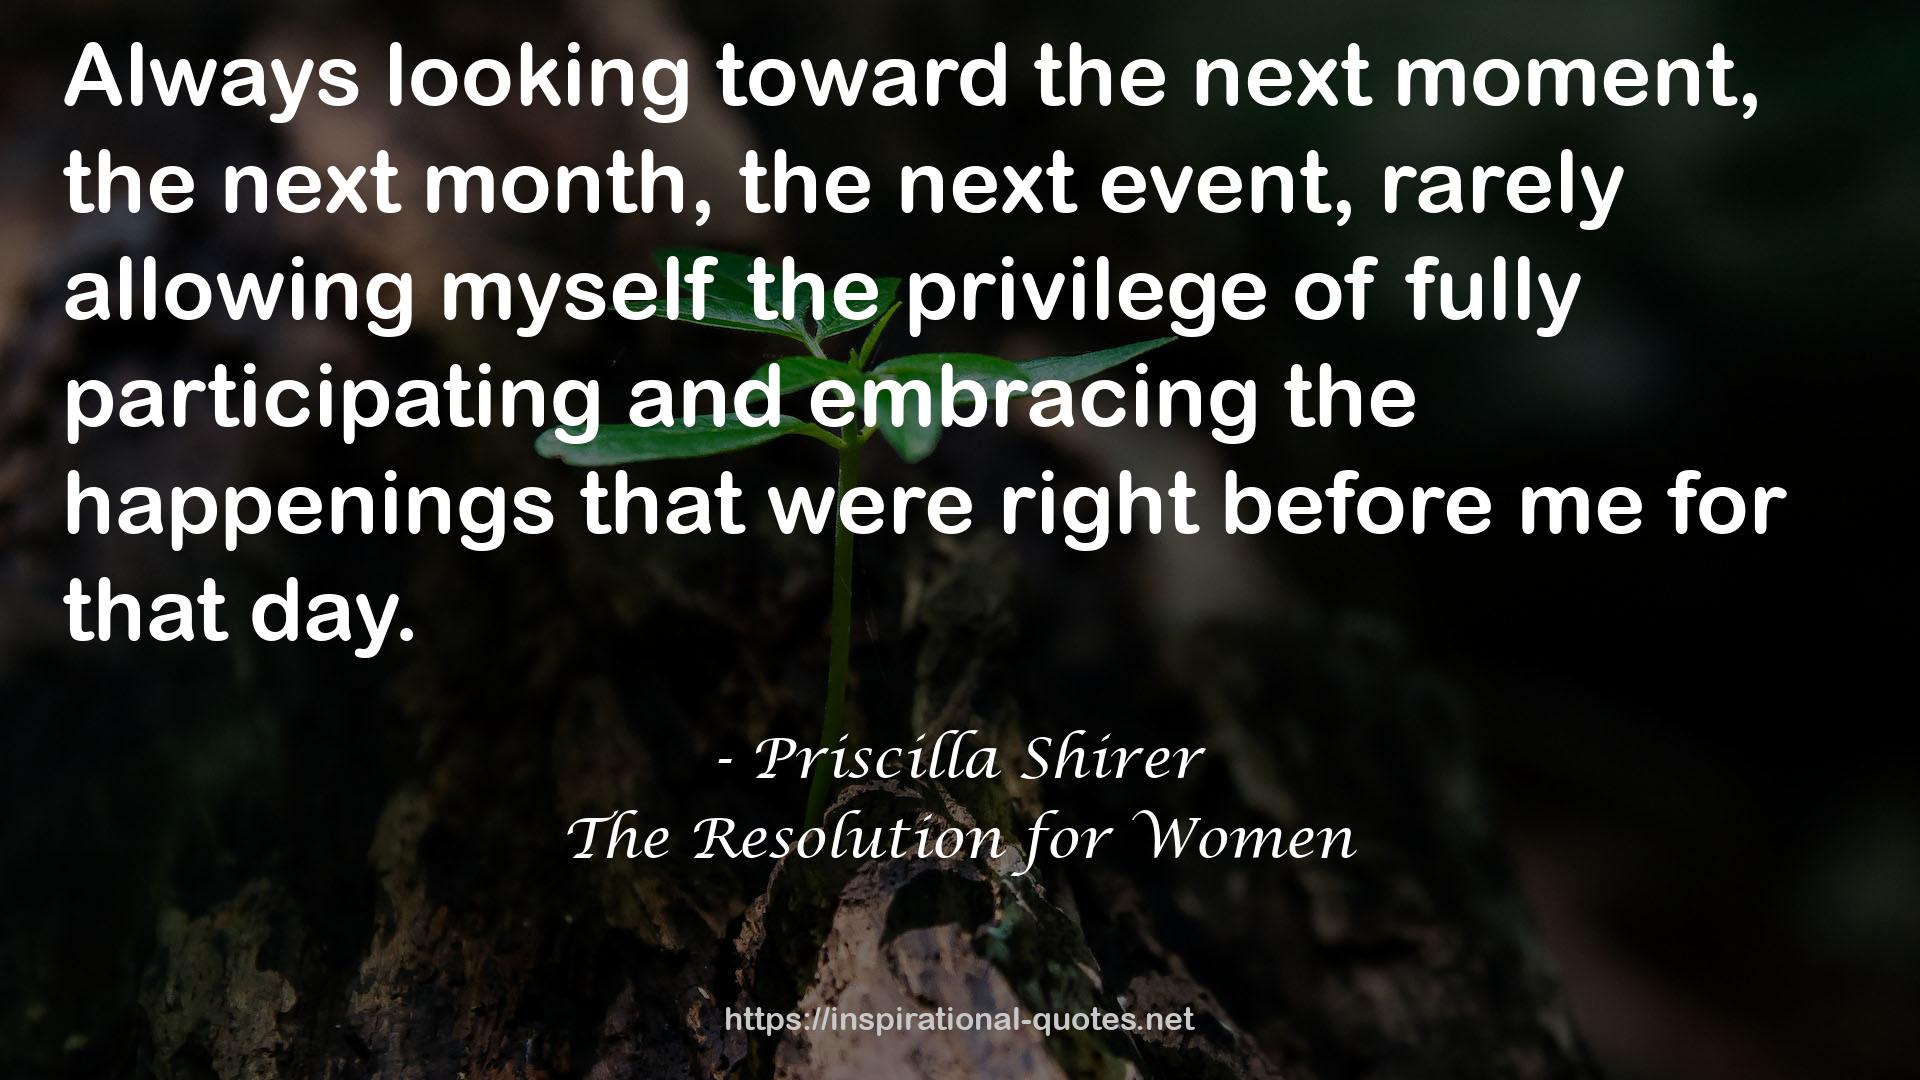 The Resolution for Women QUOTES